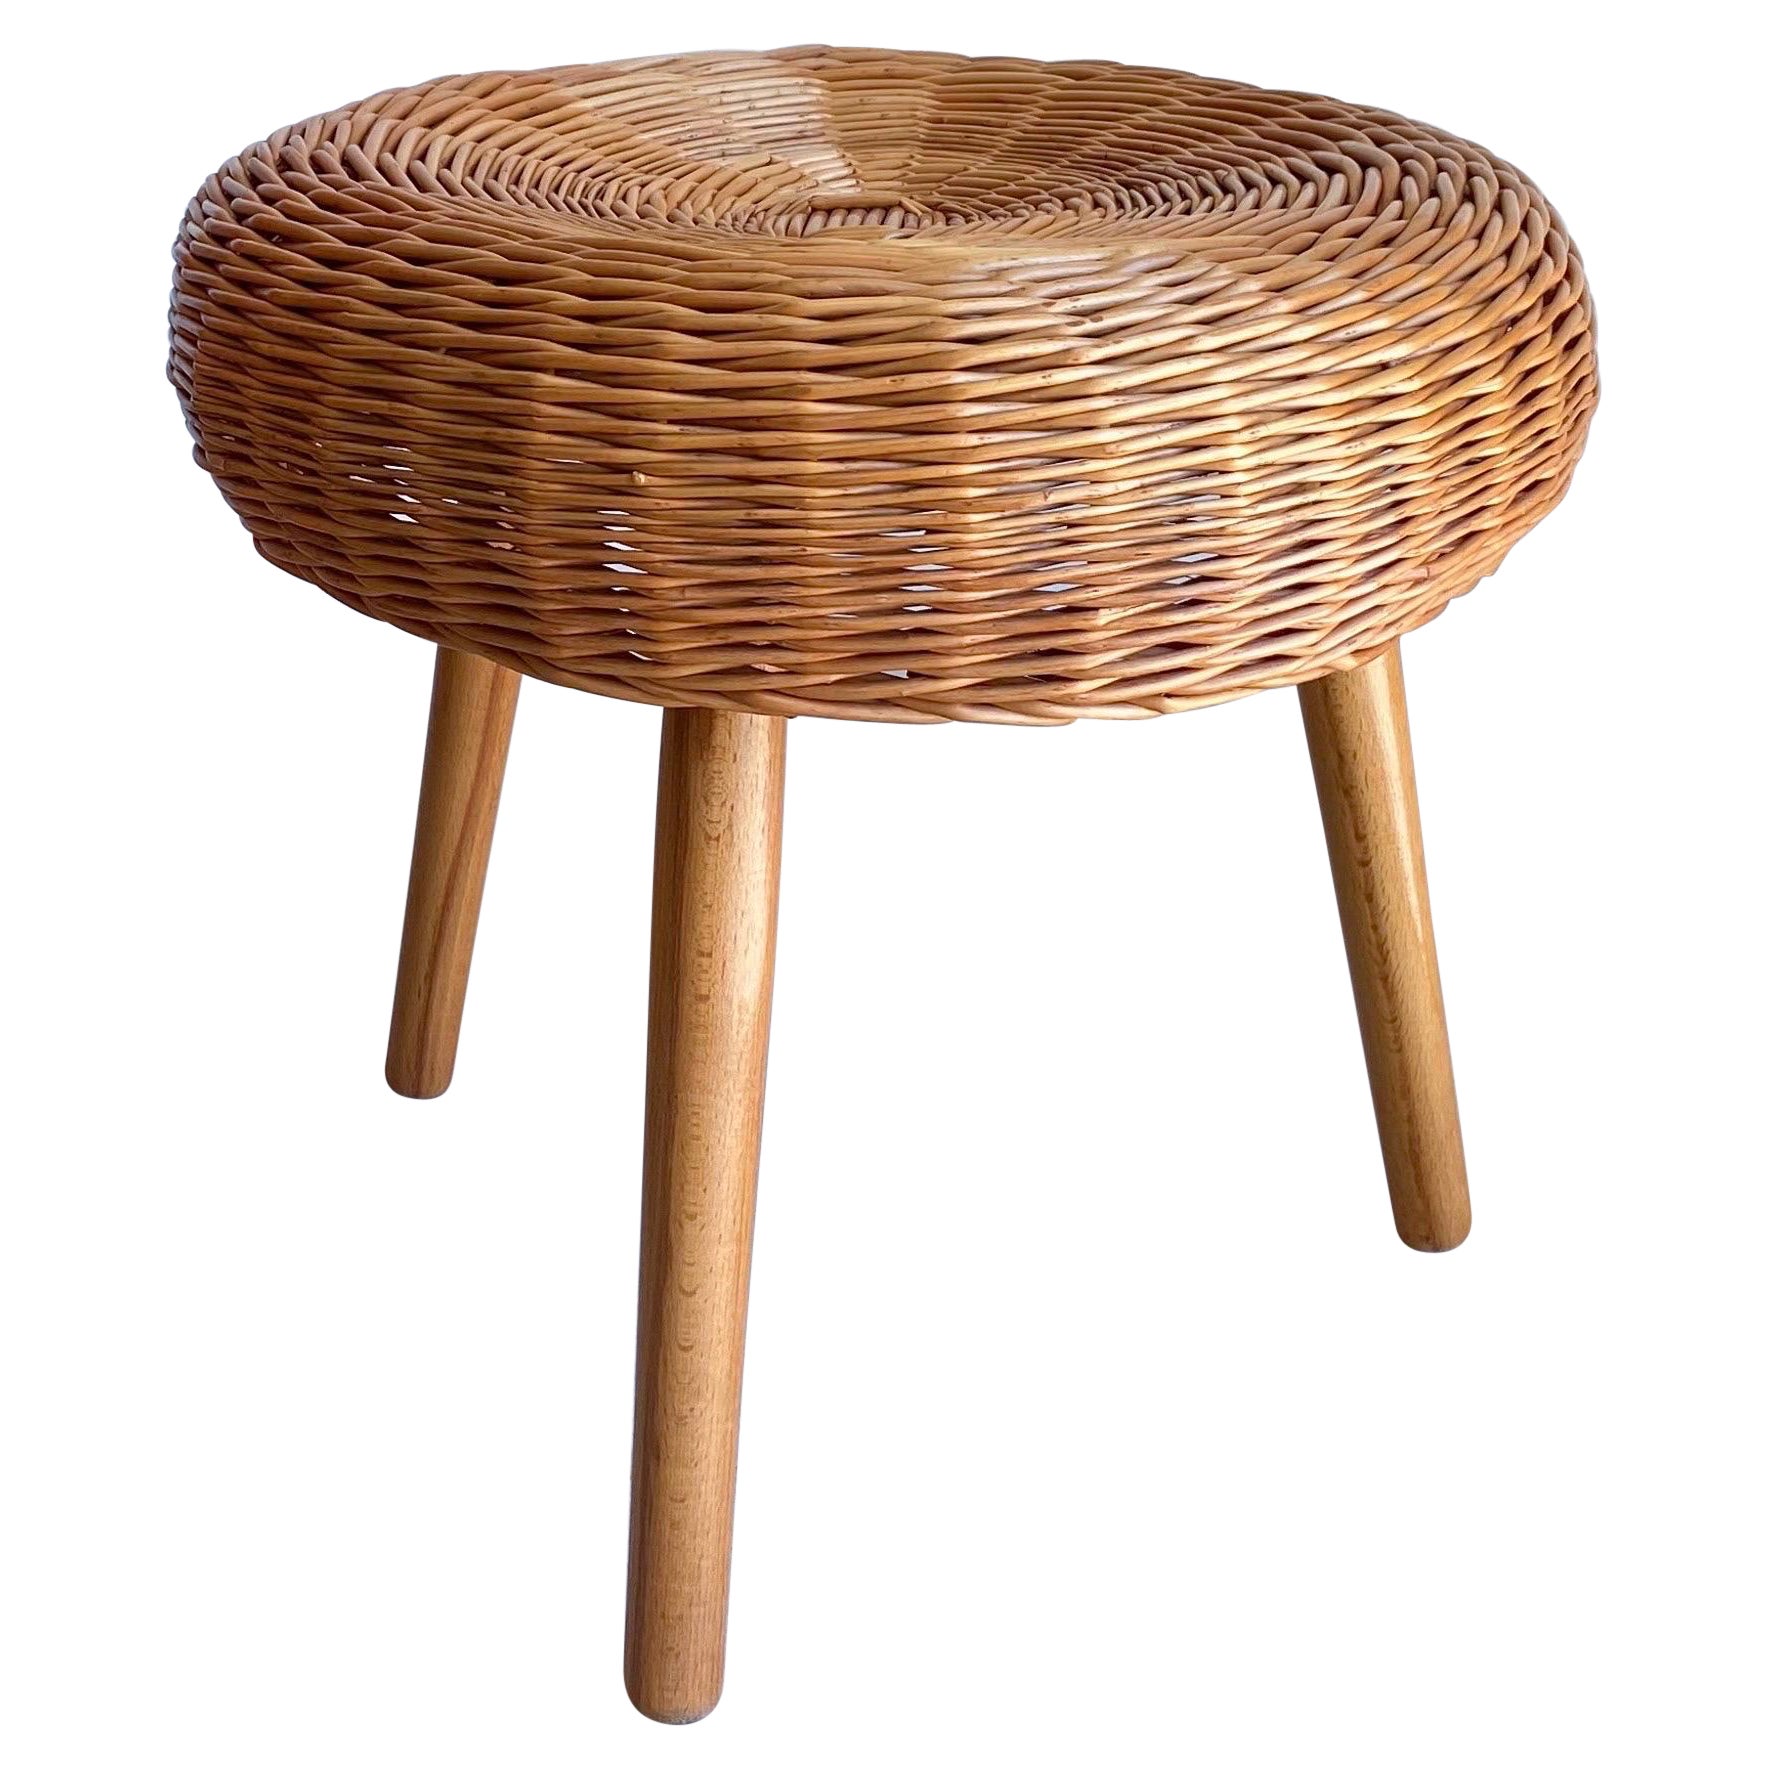 Large Rattan and Wood Stool Attributed to Tony Paul, 1960 For Sale